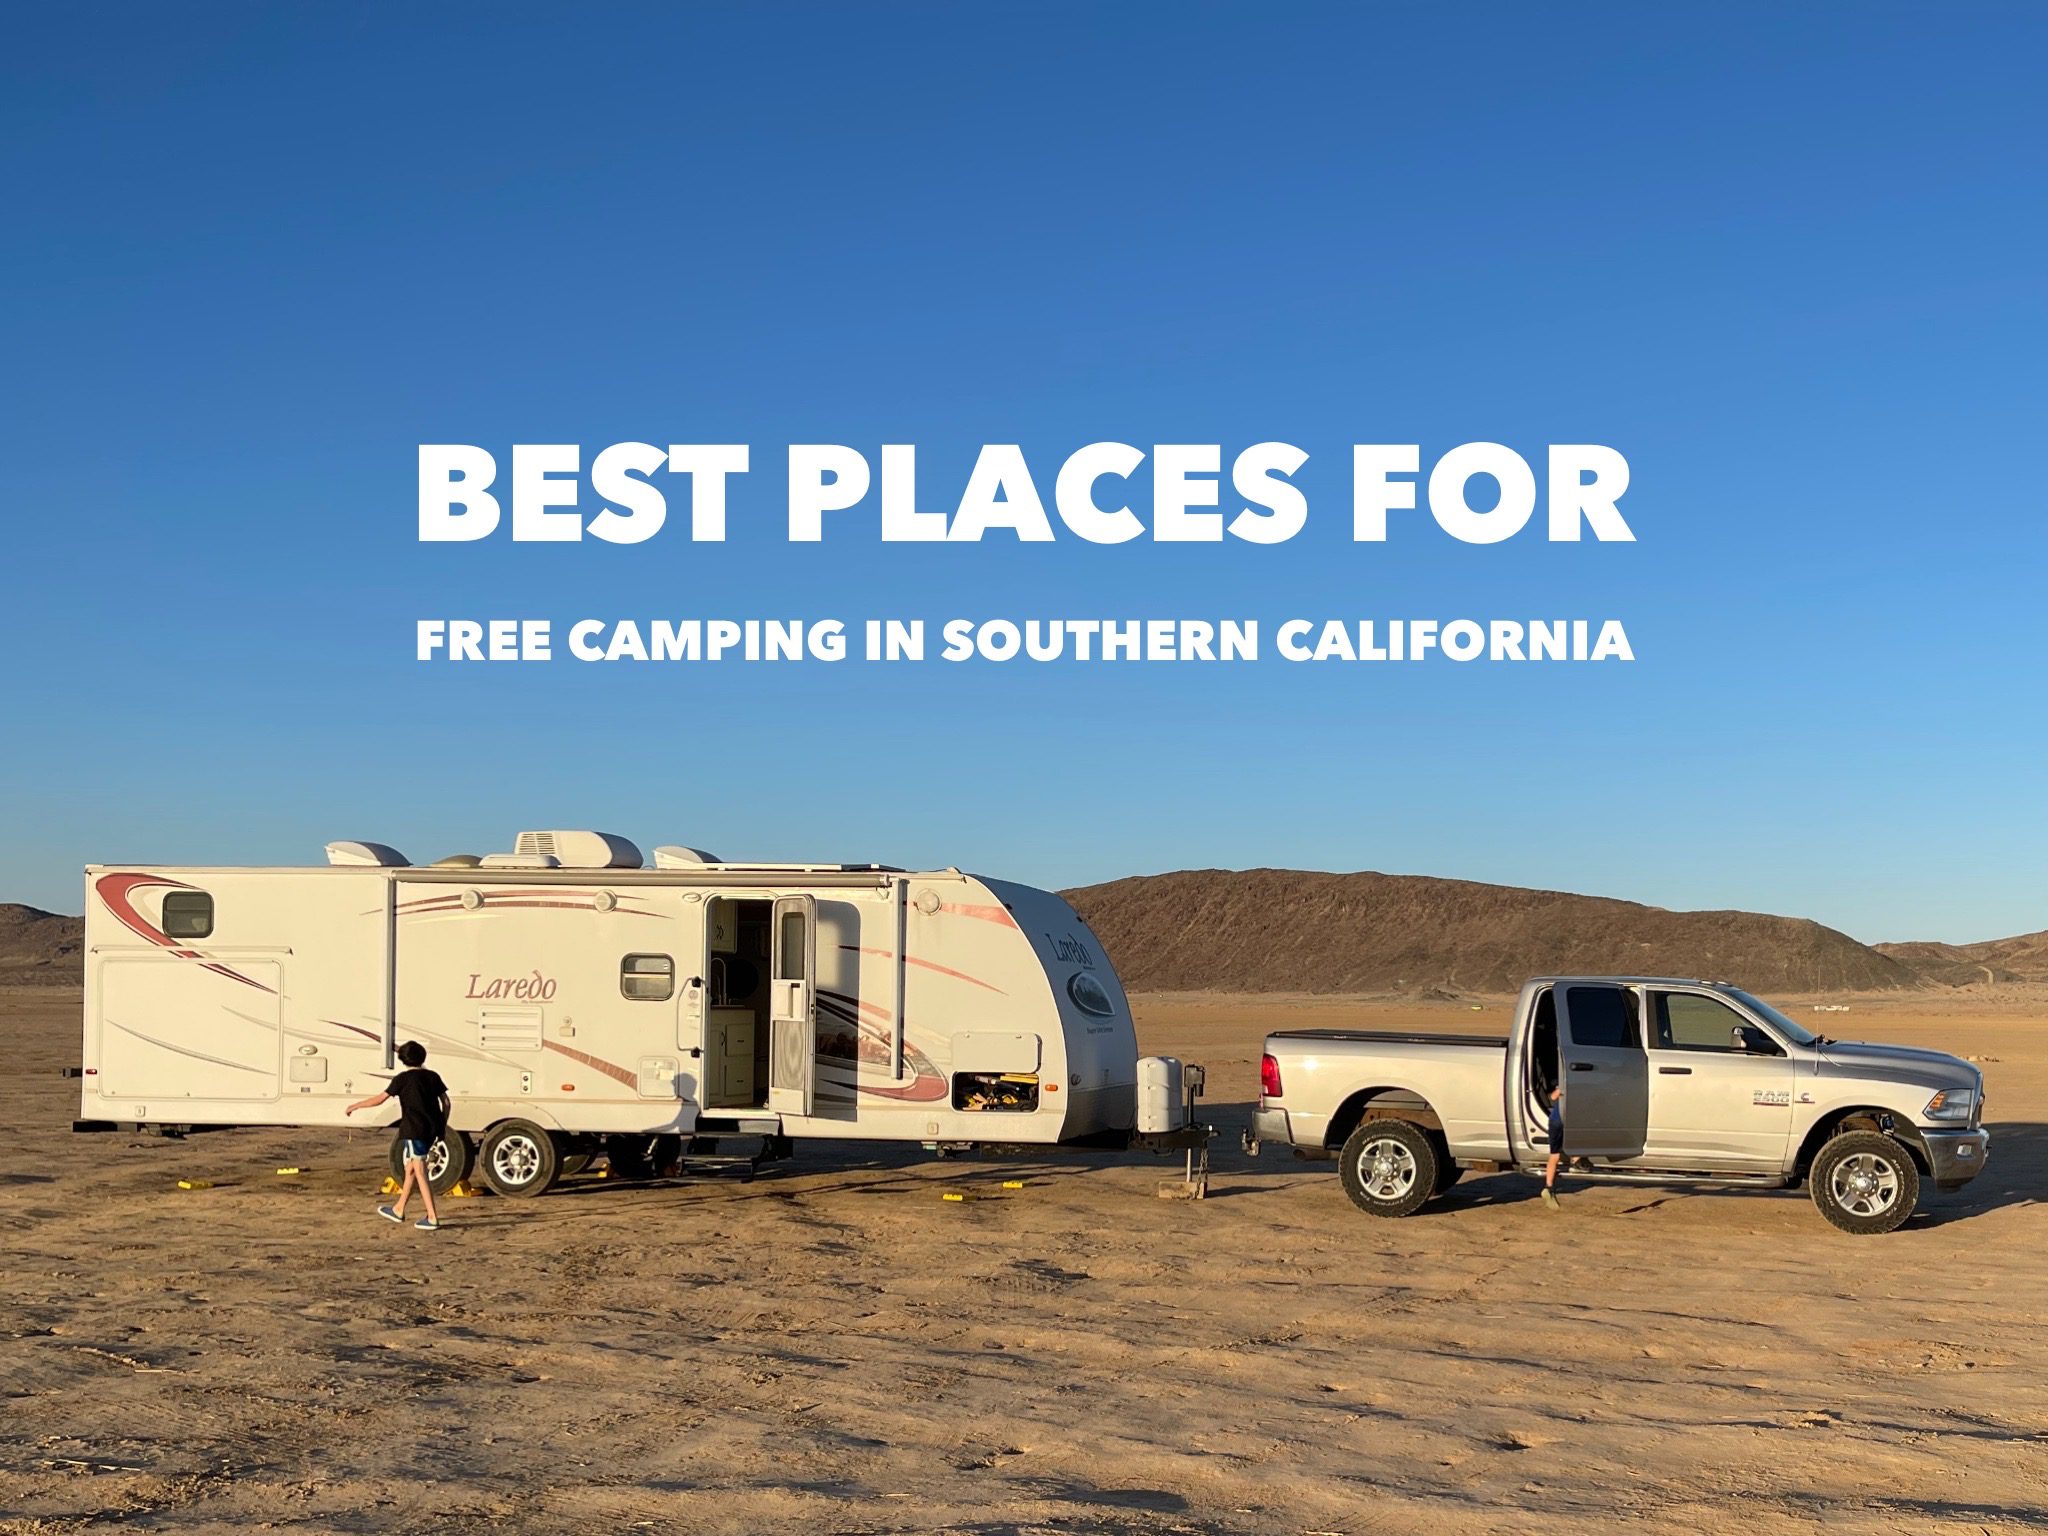 Best Free Disd Camping Southern